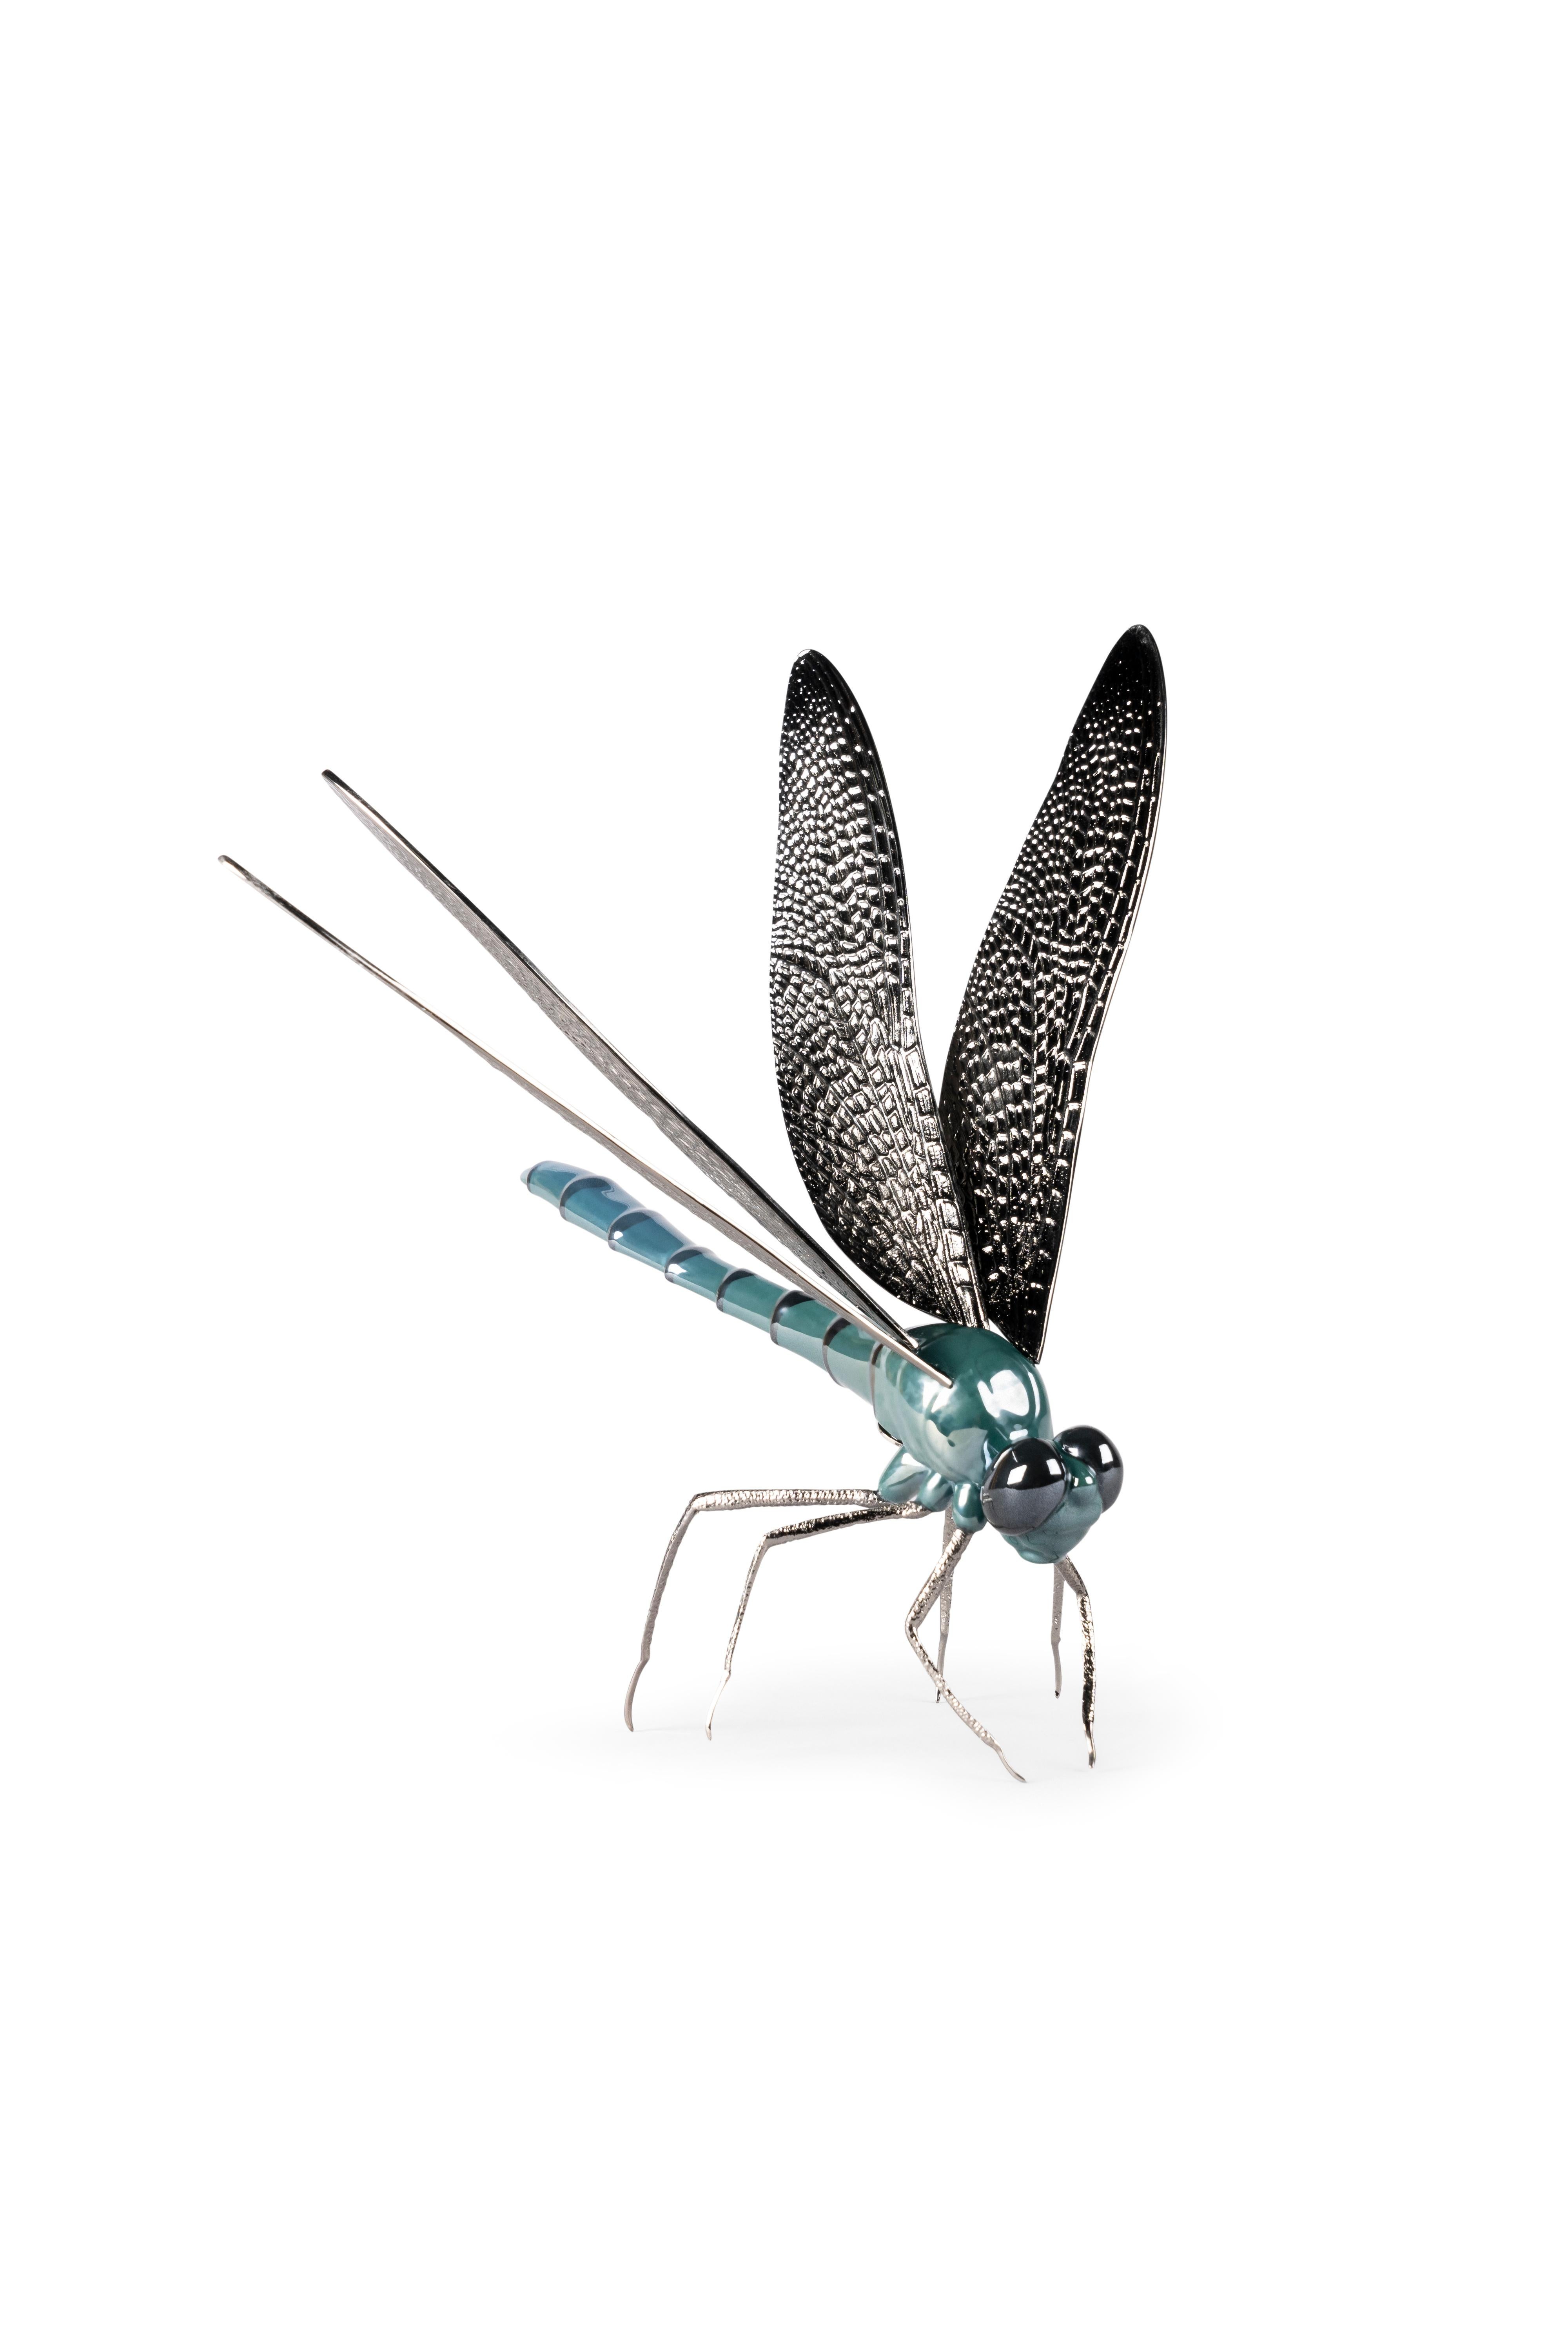 An innovative porcelain and metal creation inspired by one of the fascinating creatures in nature. Part of the Awesome Insects Collection. This original piece is made in glazed porcelain and decorated with pearl luster. The legs and wings are in